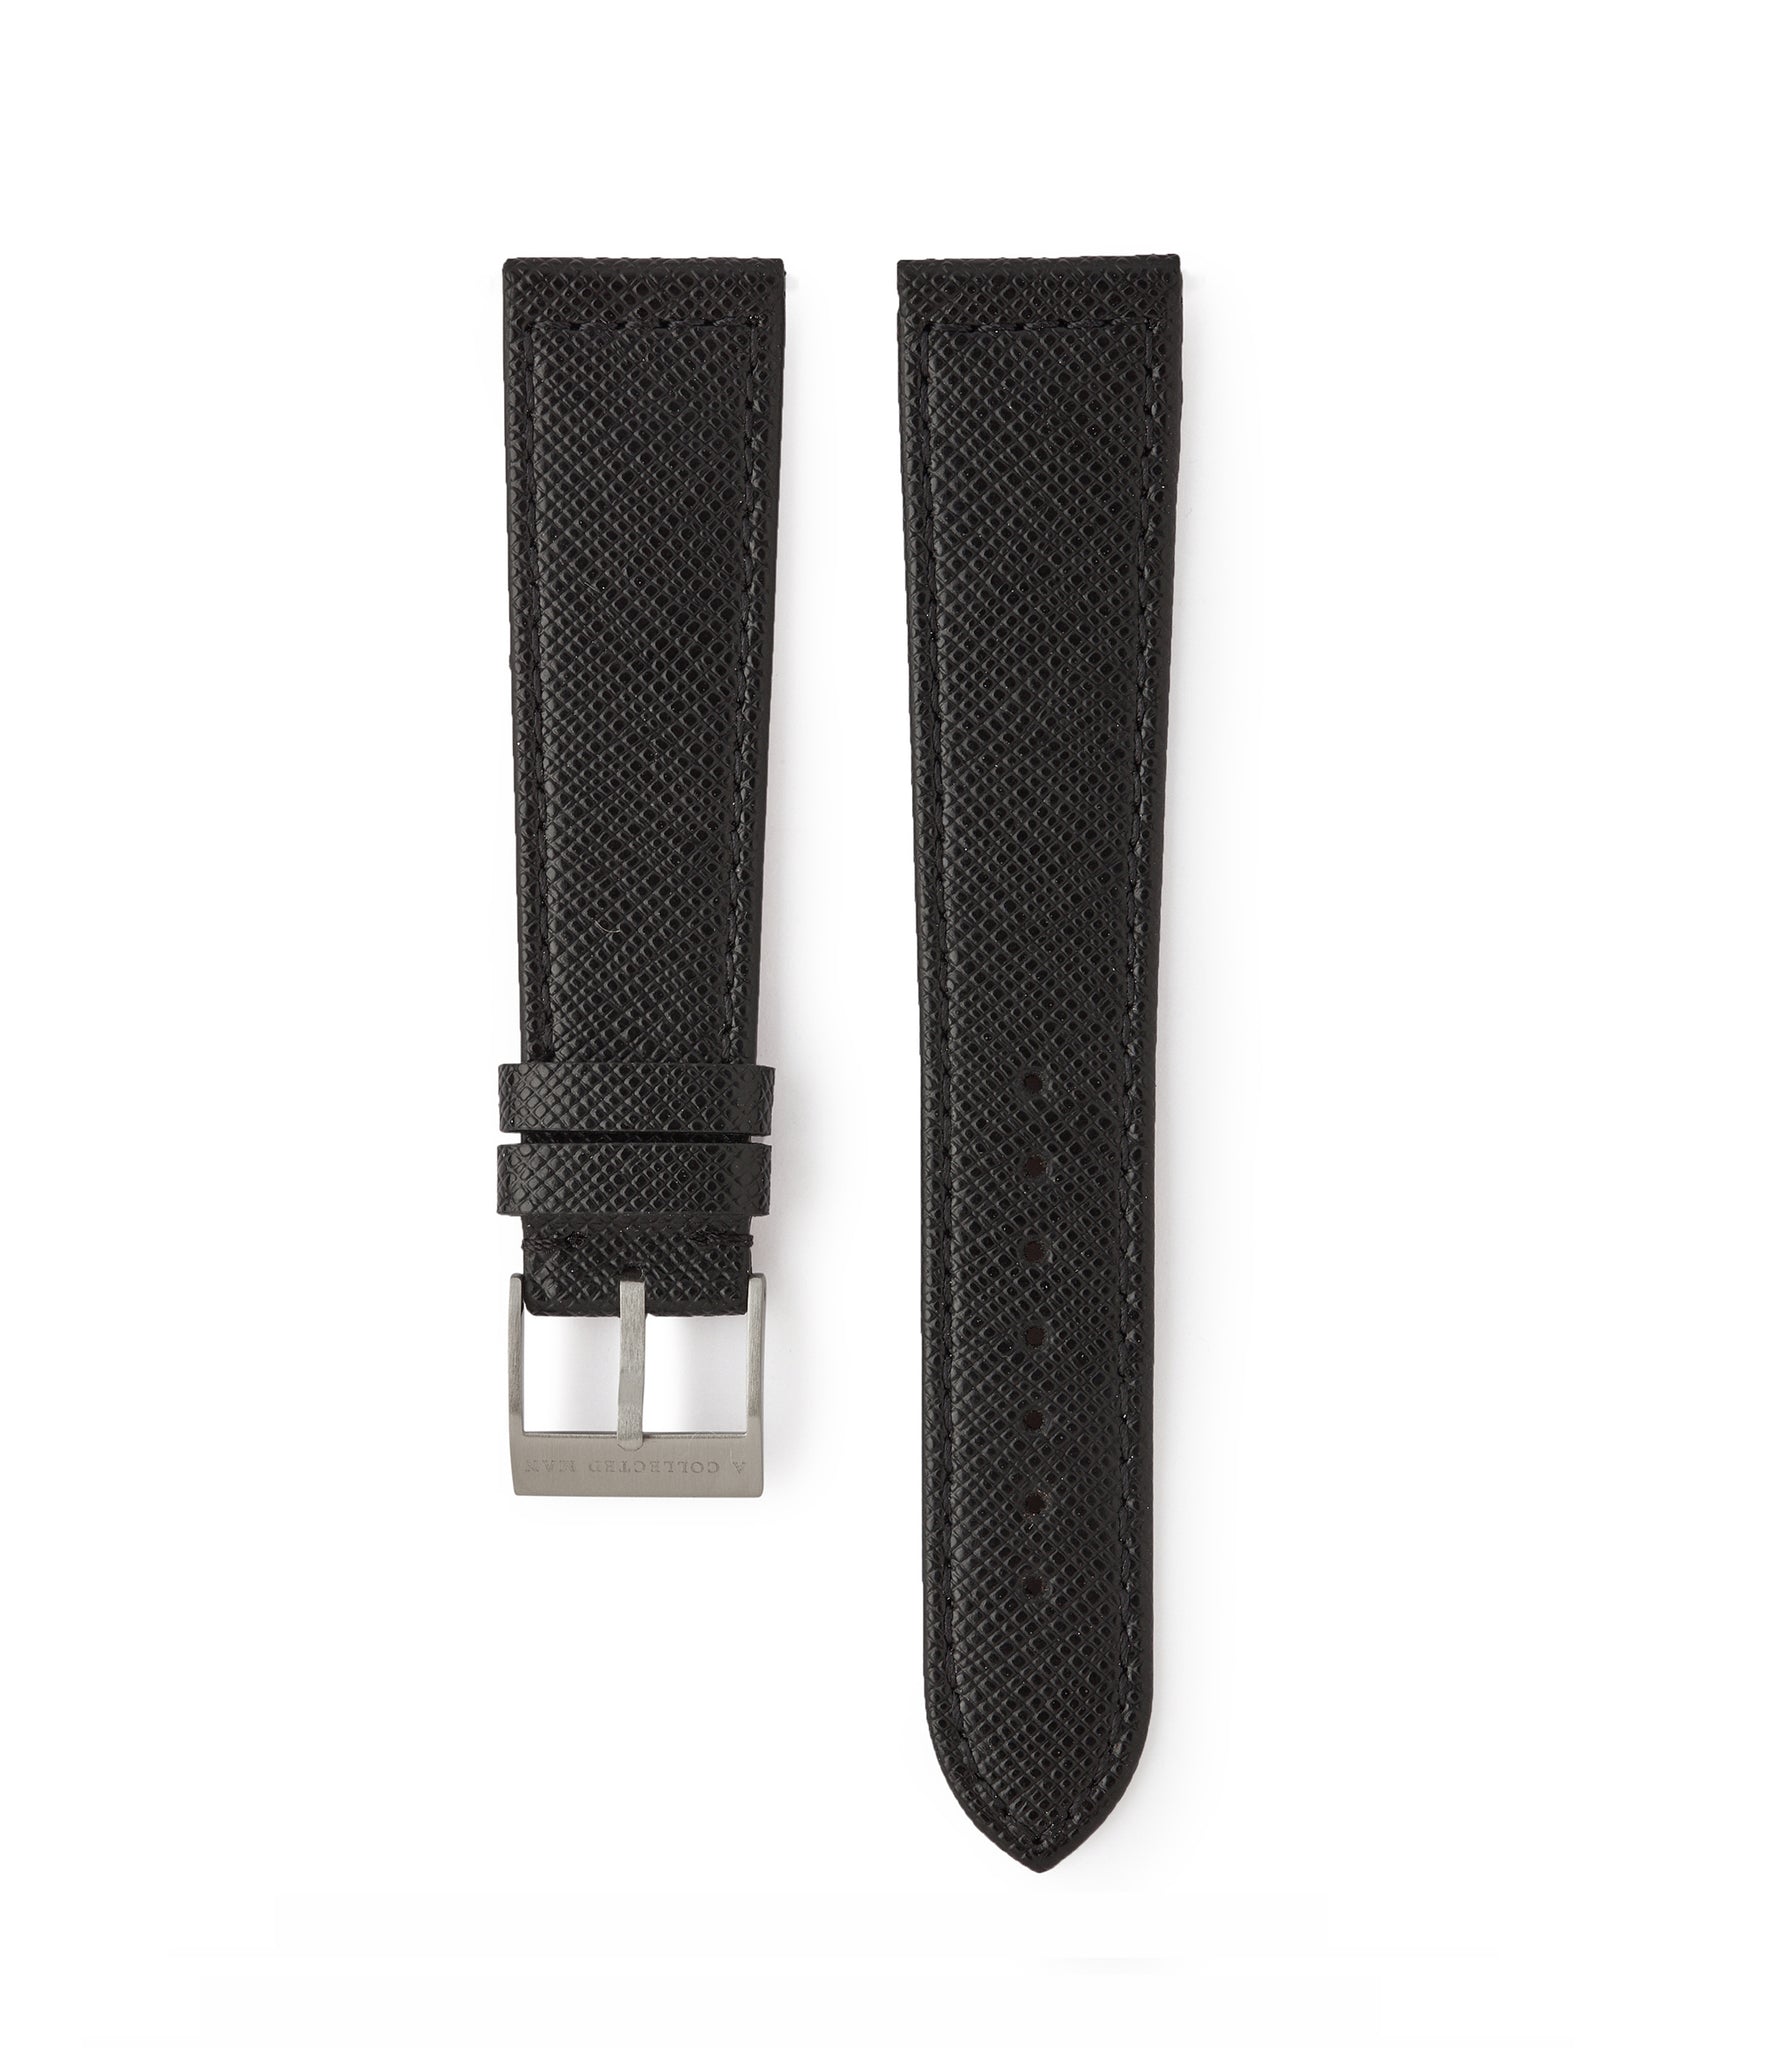 Selling Milano II Molequin watch strap Gronefeld black saffiano leather box stitched quick-release springbars buckle handcrafted European-made for sale online at A Collected Man London